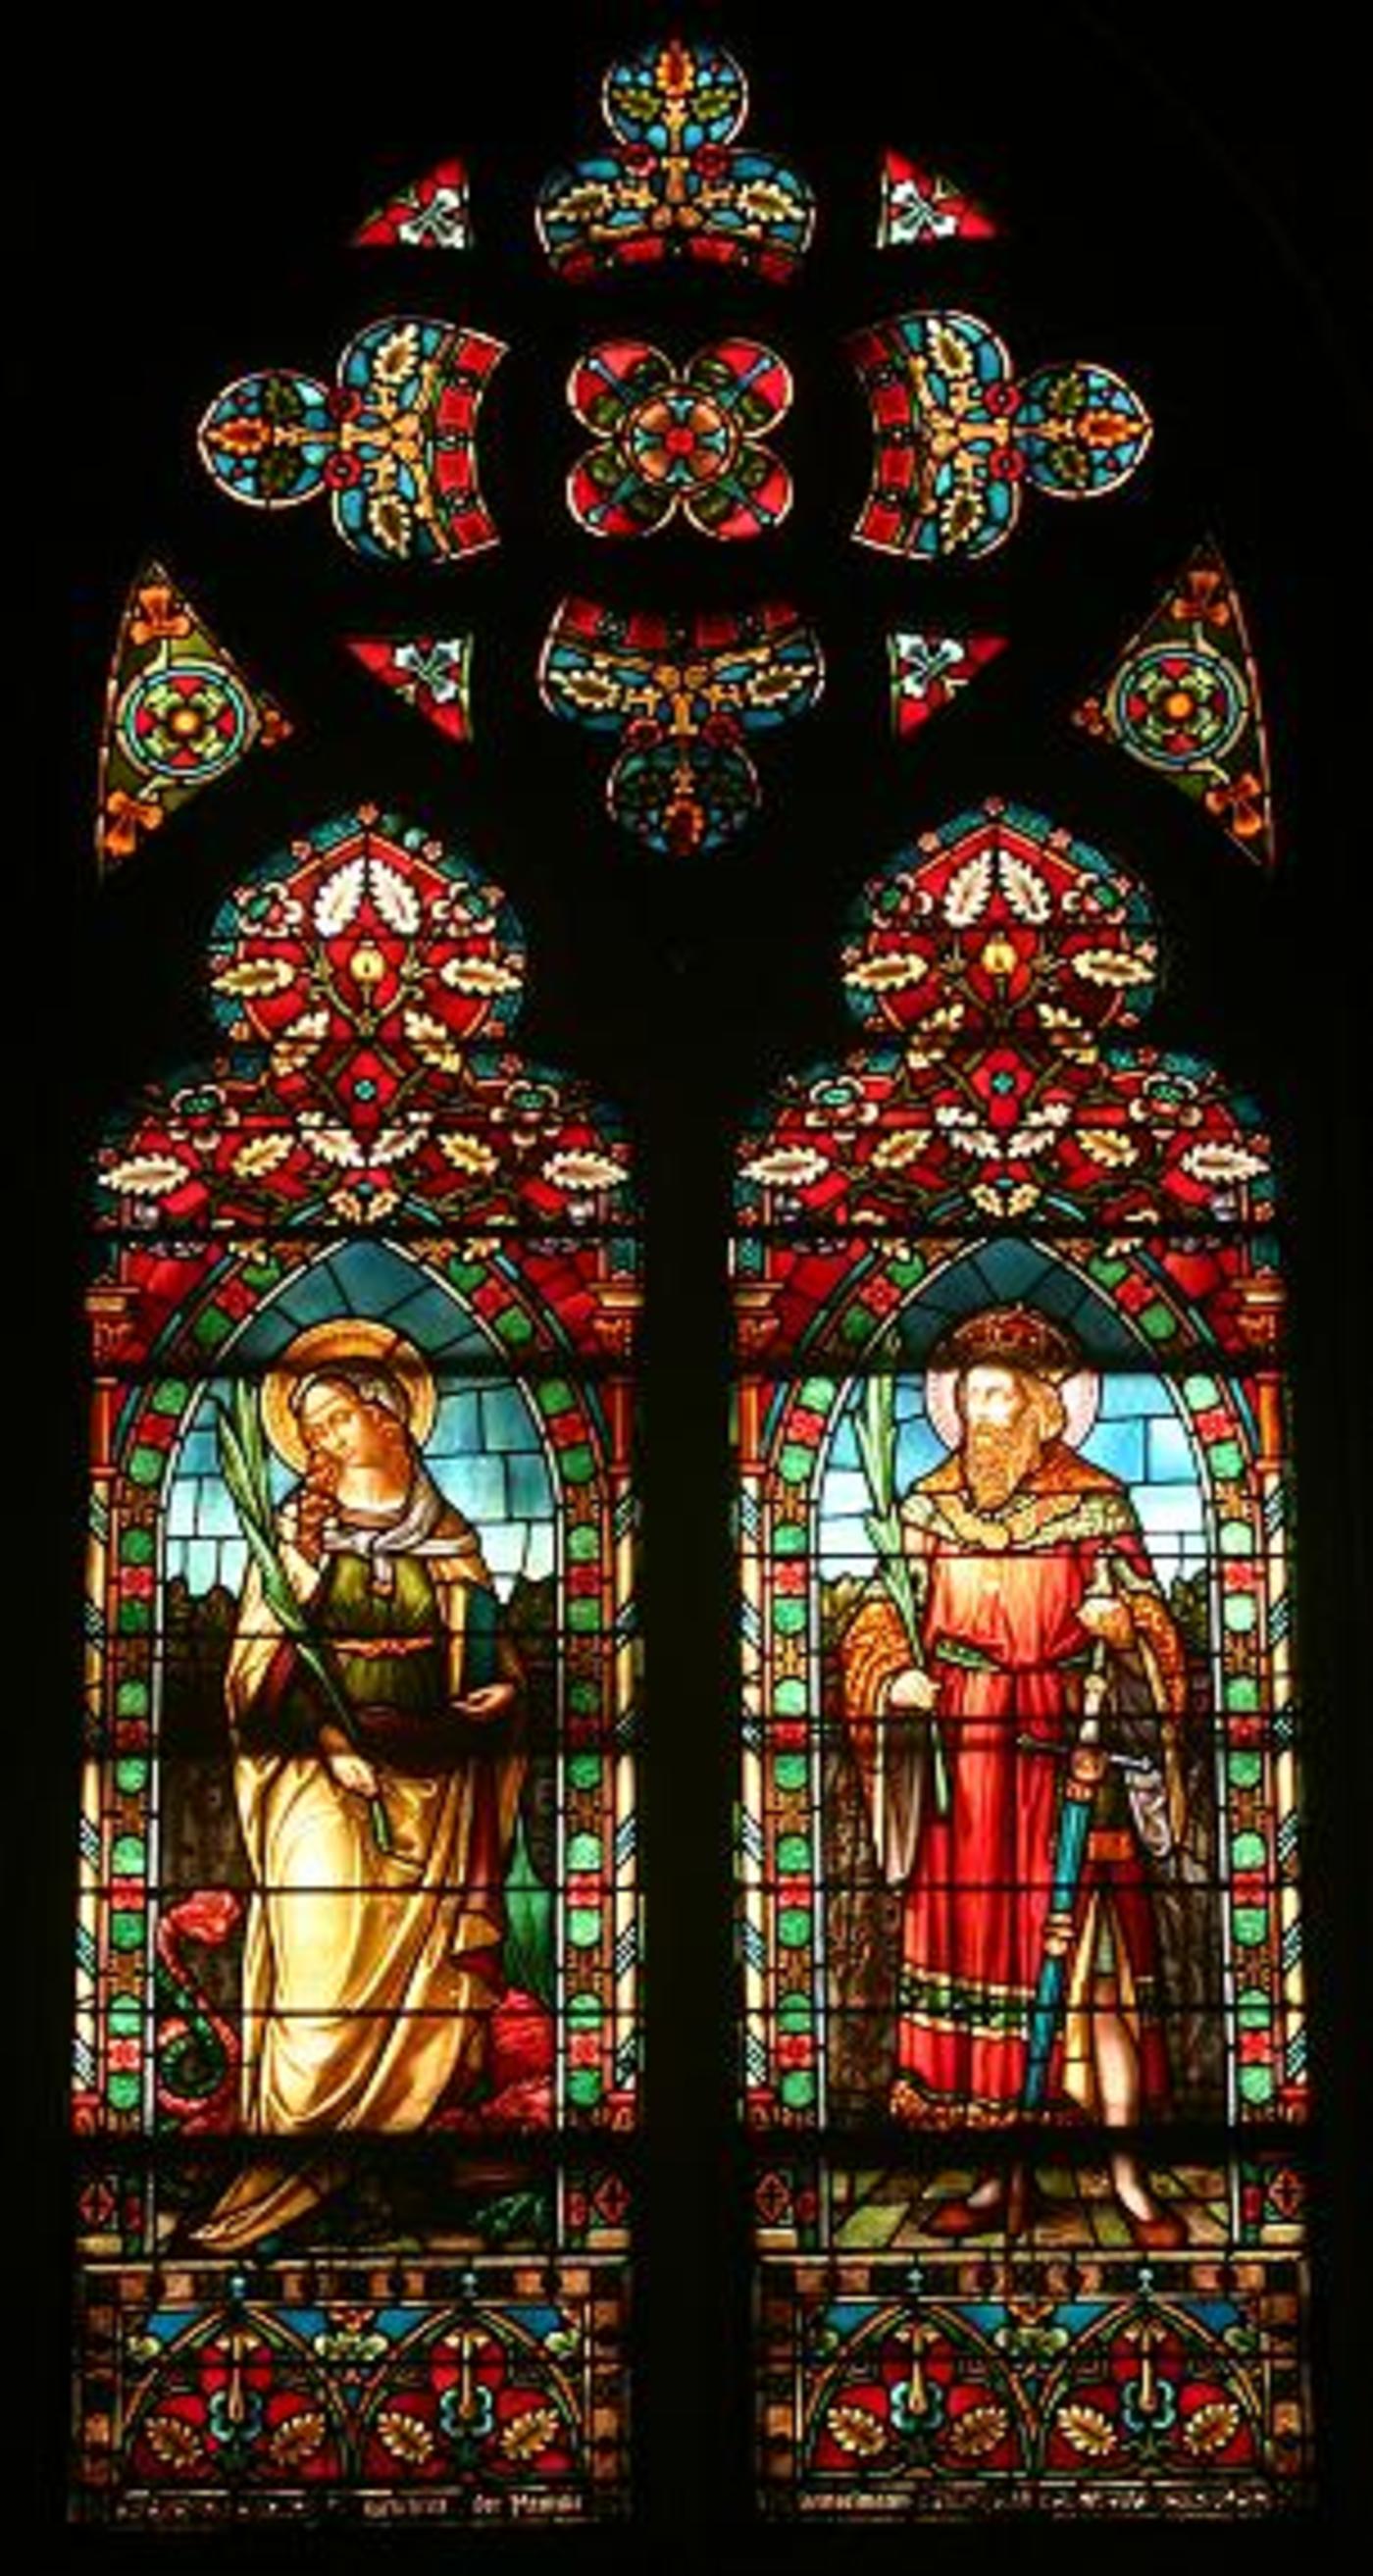 Windows #12A and 12B St. Margaret of Antioch and St. Wenceslaus of Bohemia